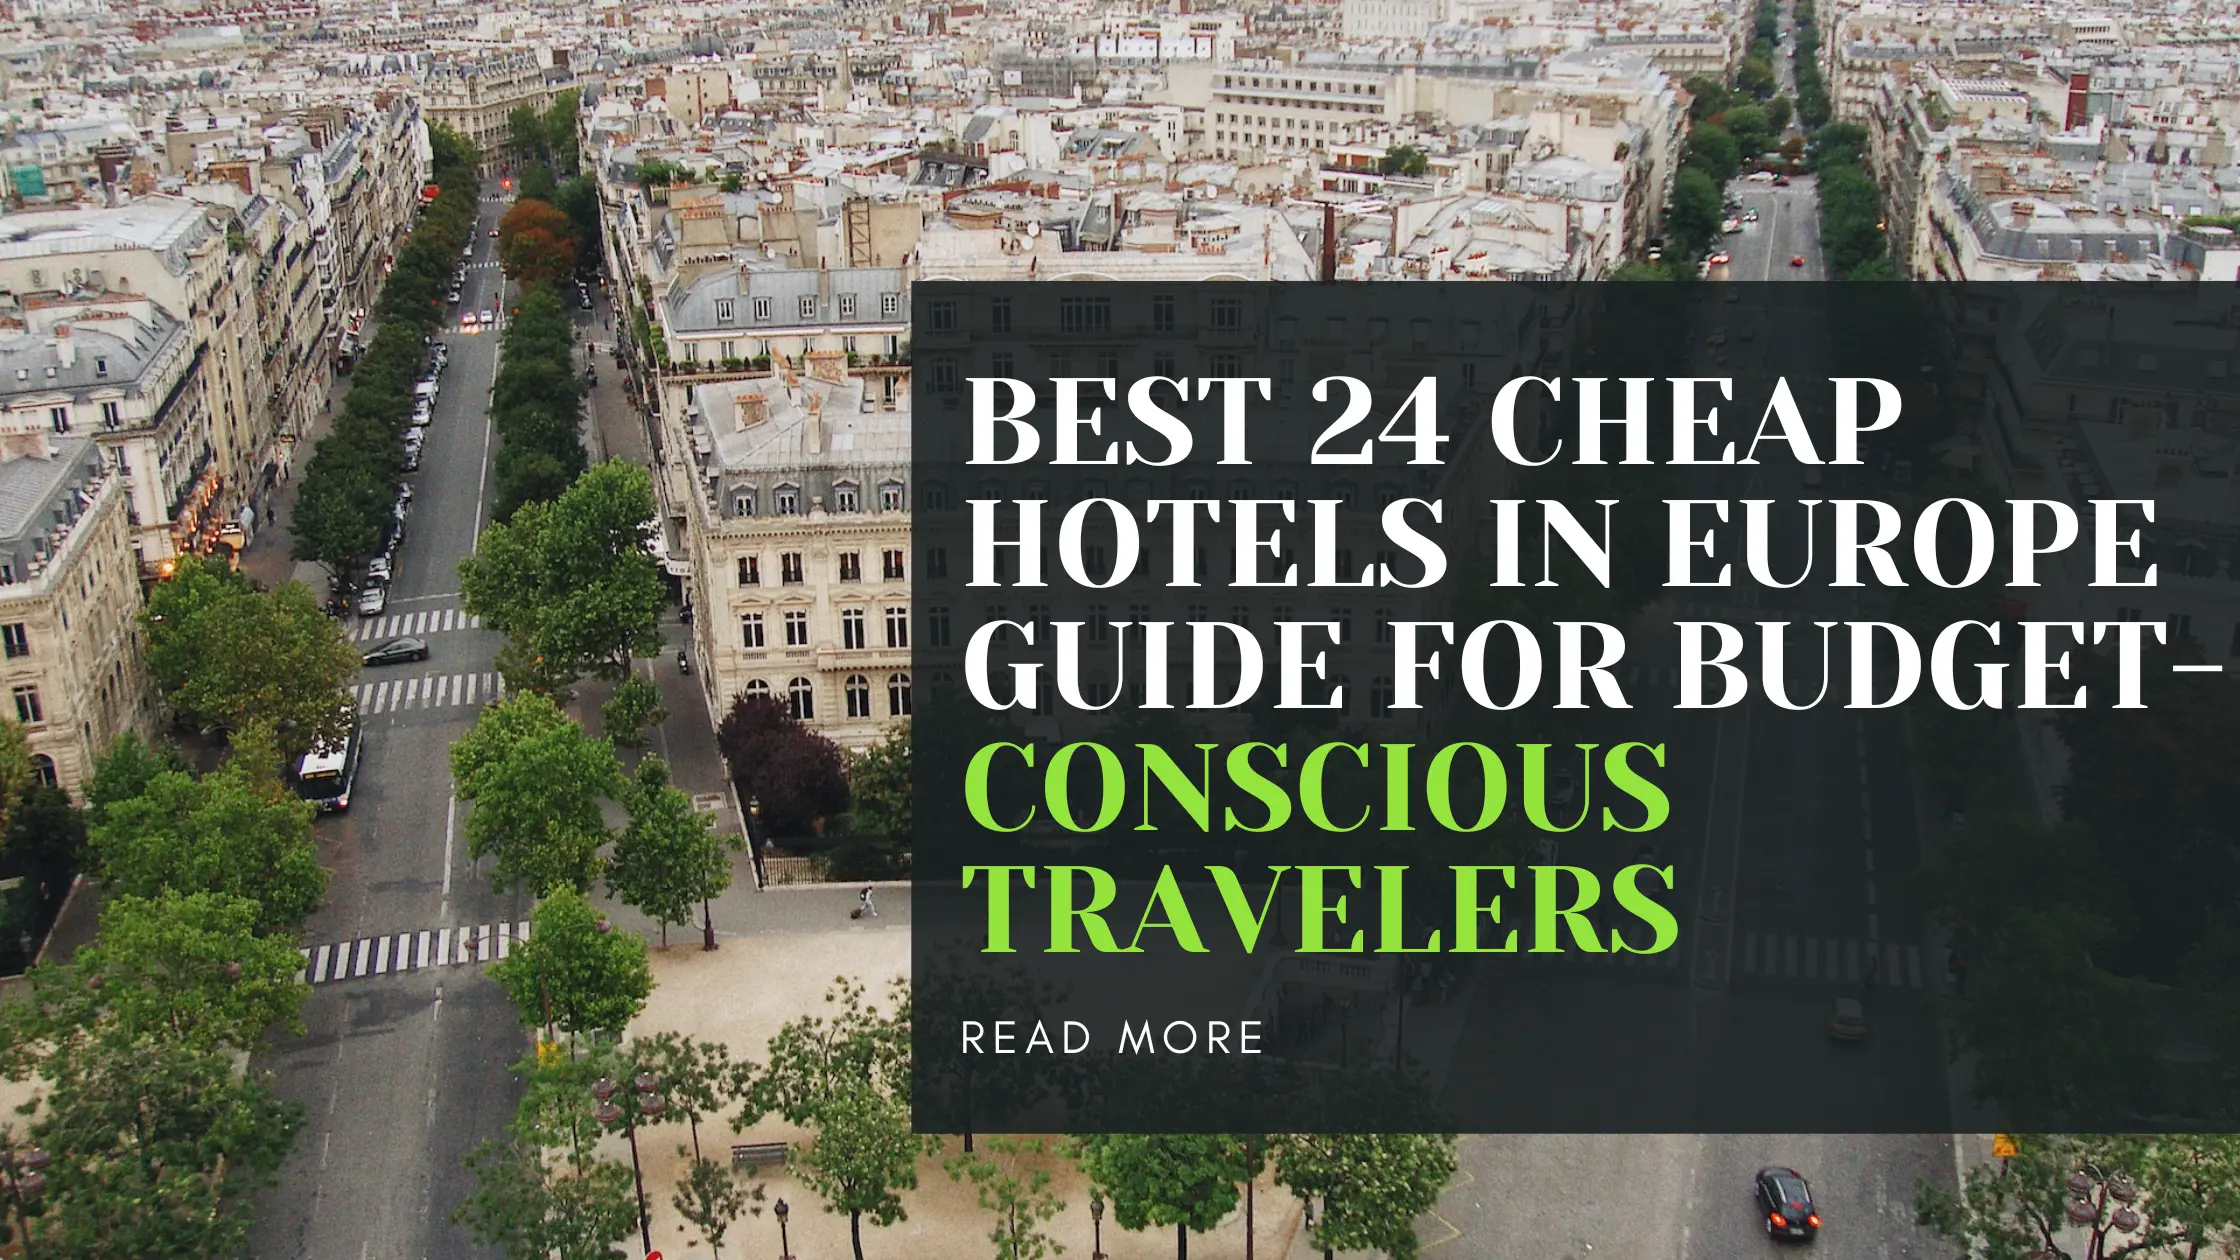 Best 24 Cheap Hotels in Europe Guide for Budget-Conscious Travelers